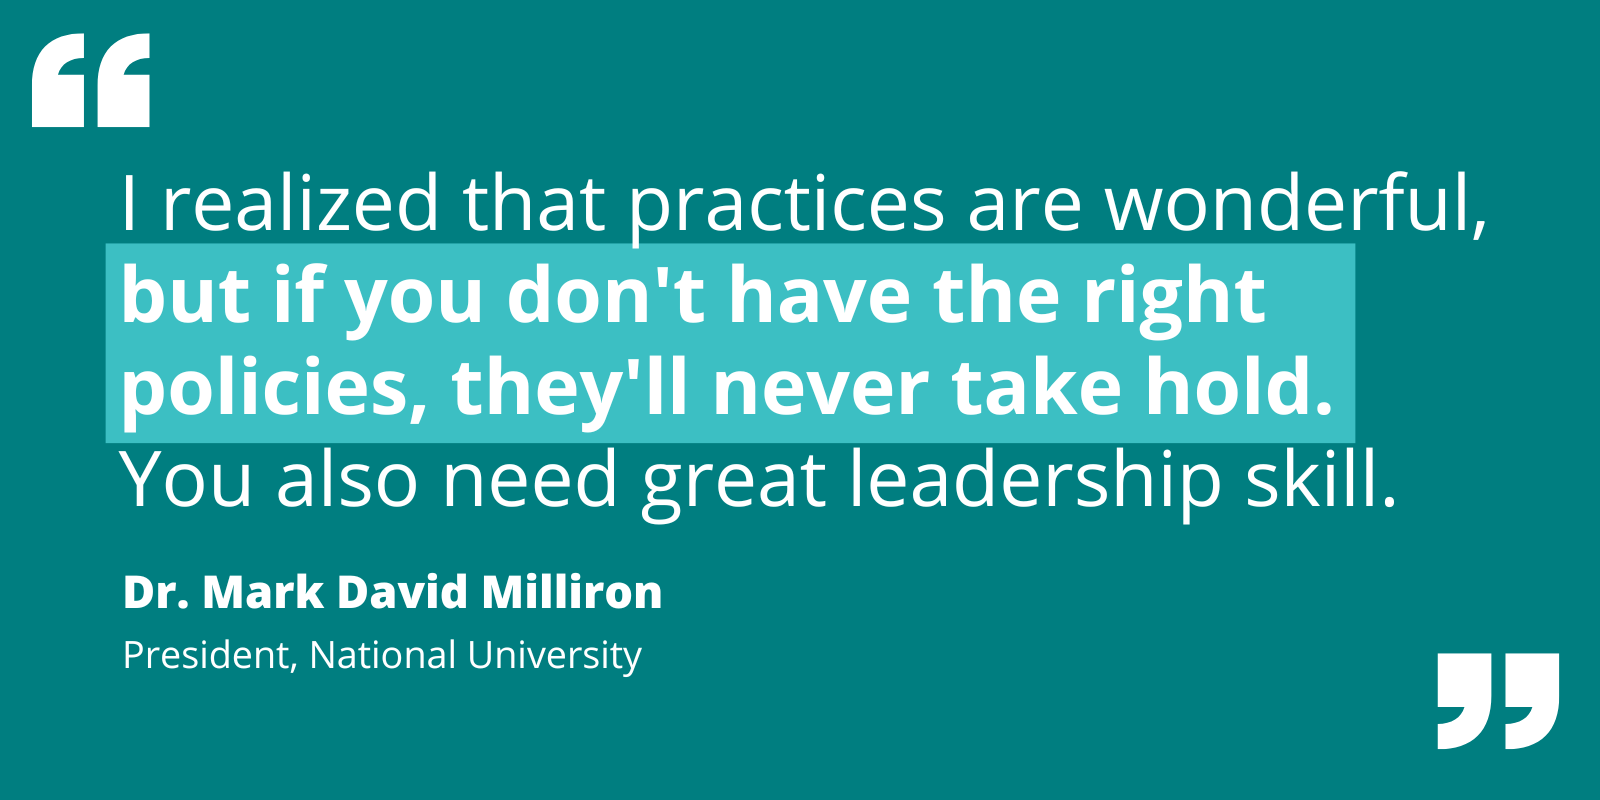 Quote by Mark Milliron re: needing policies that support practices, and also needing great leadership skill.